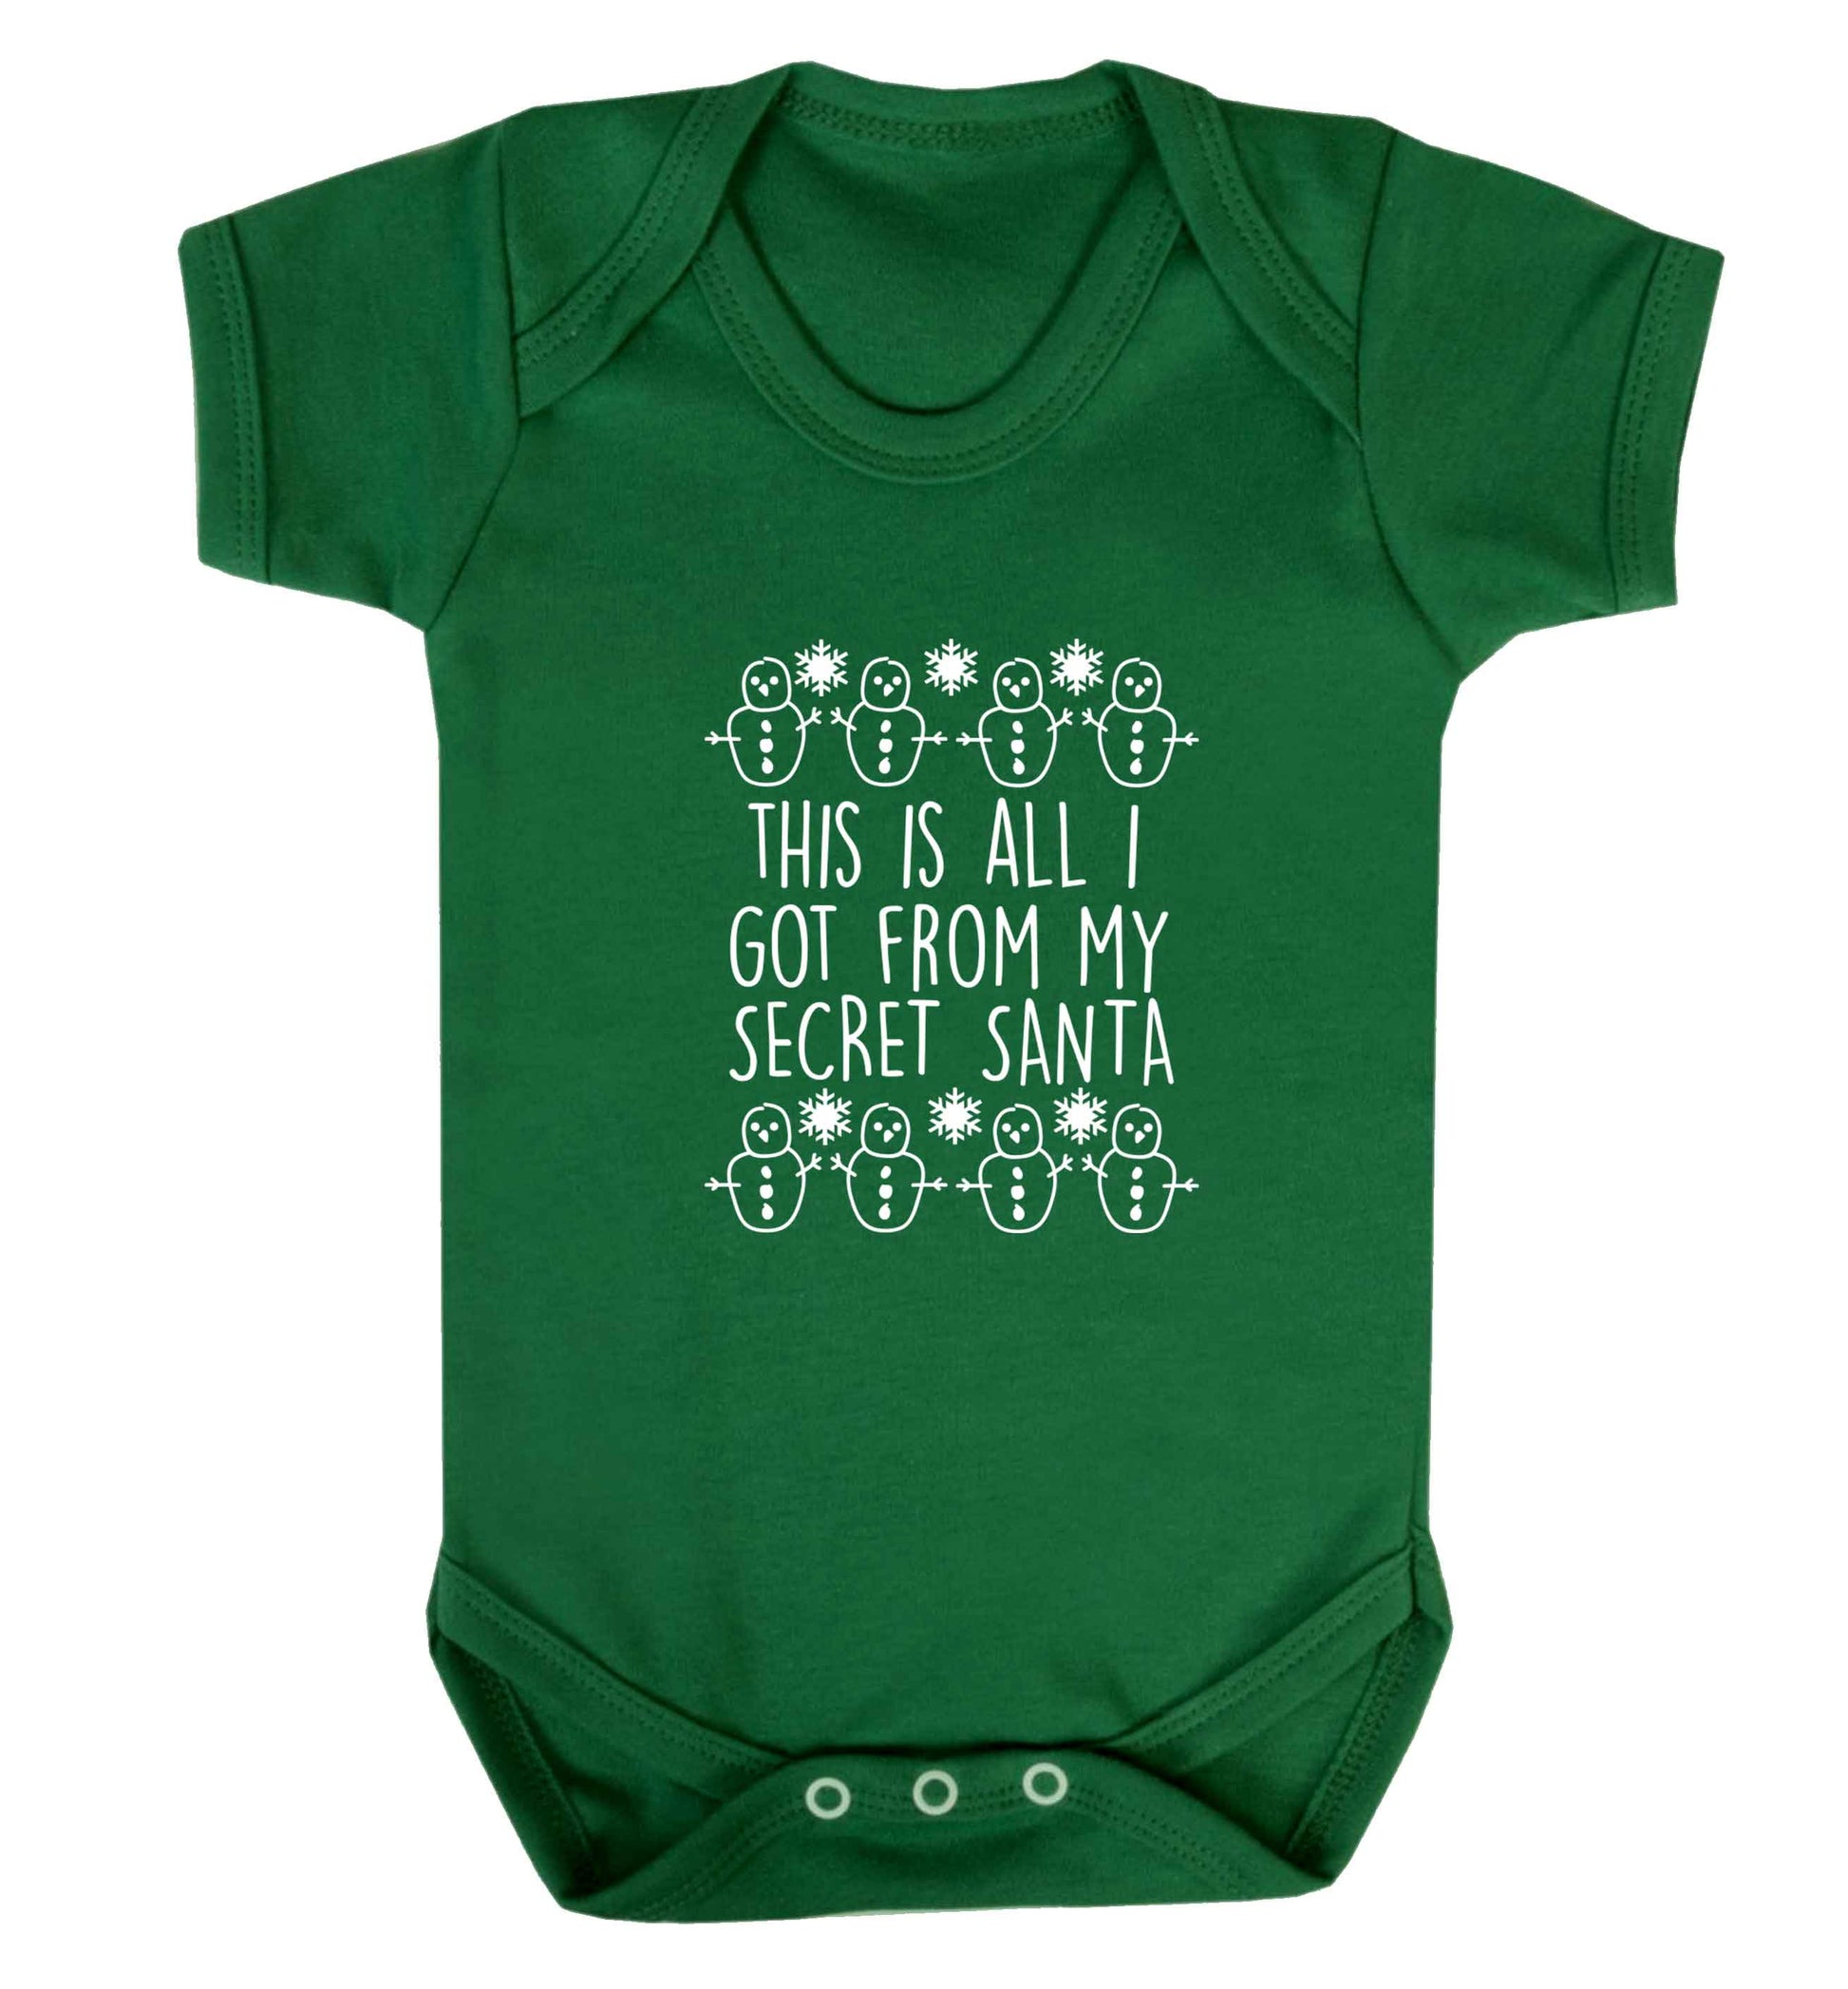 This is all I got from my secret Santa baby vest green 18-24 months